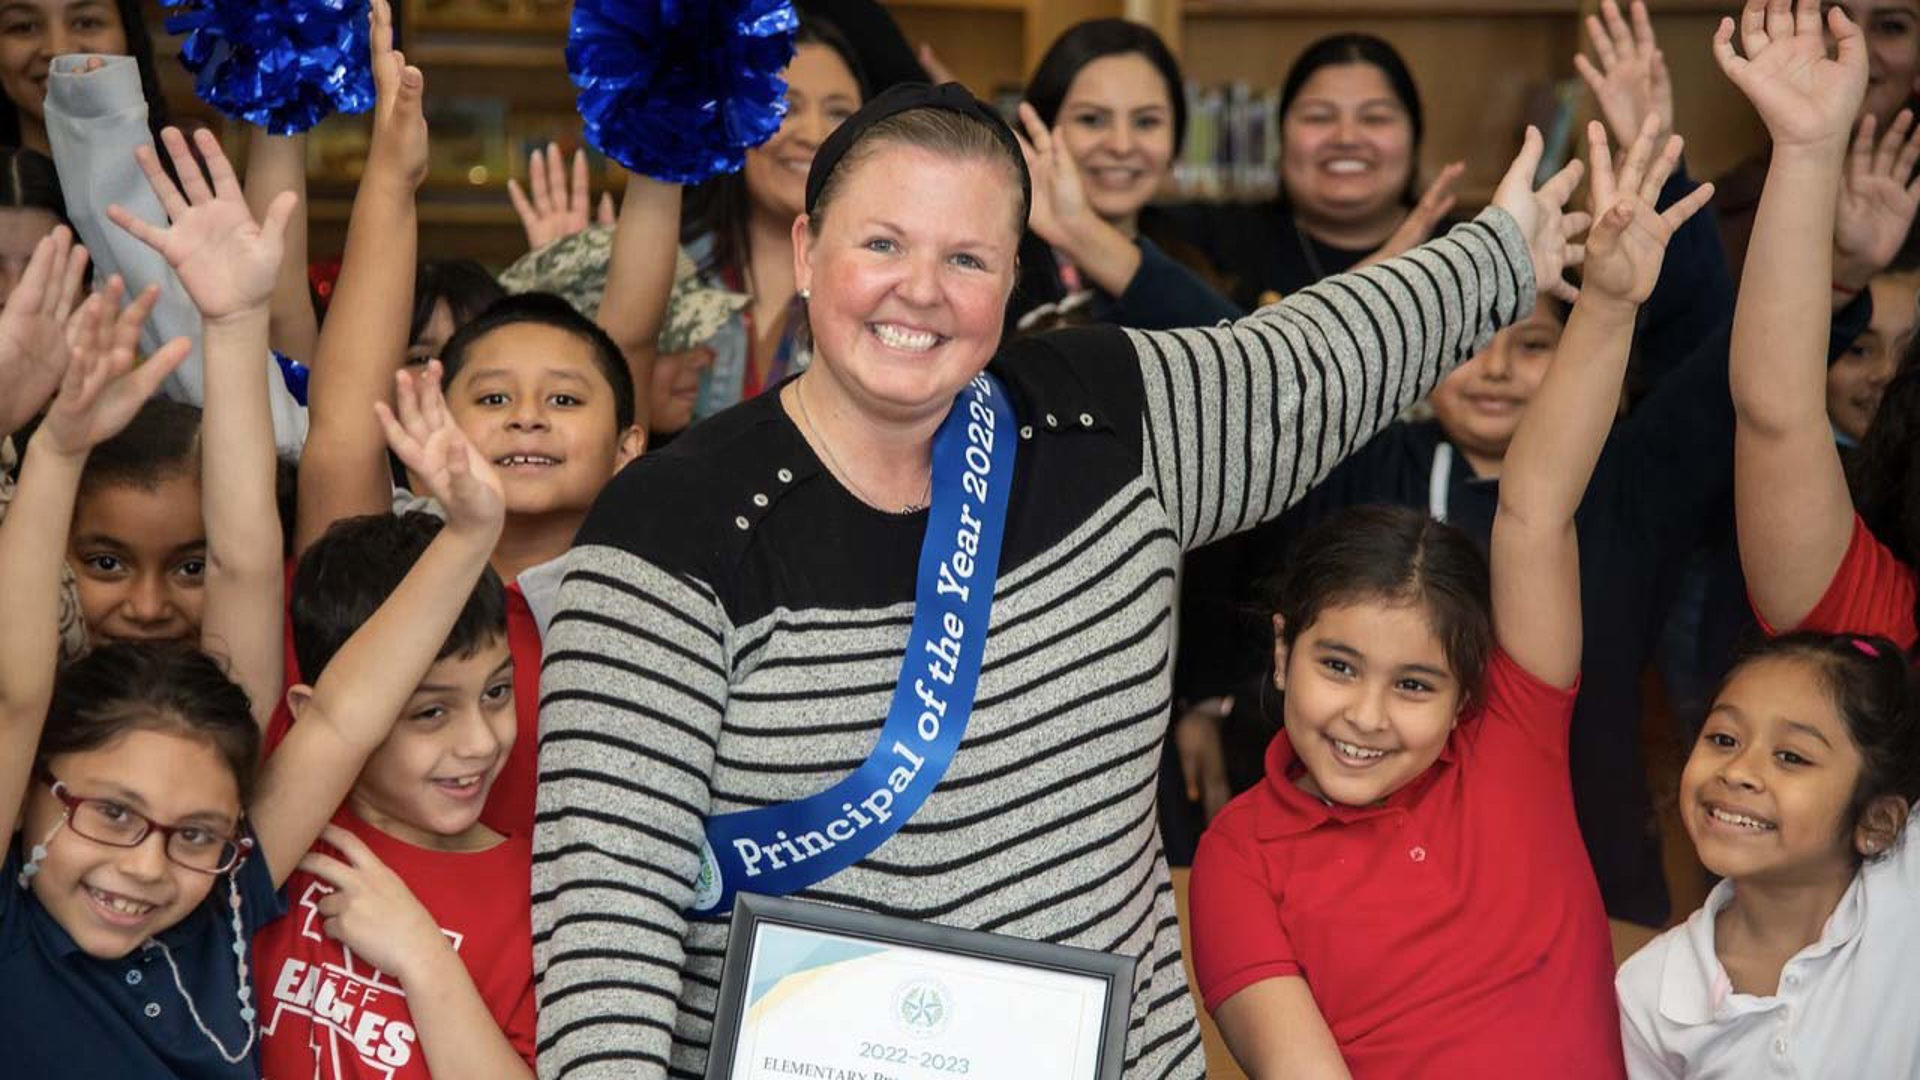 "The irony is not lost on me as I was at the banquet to be honored for being Principal of the Year almost exactly a year ago," Neff principal Amanda Wingard said.